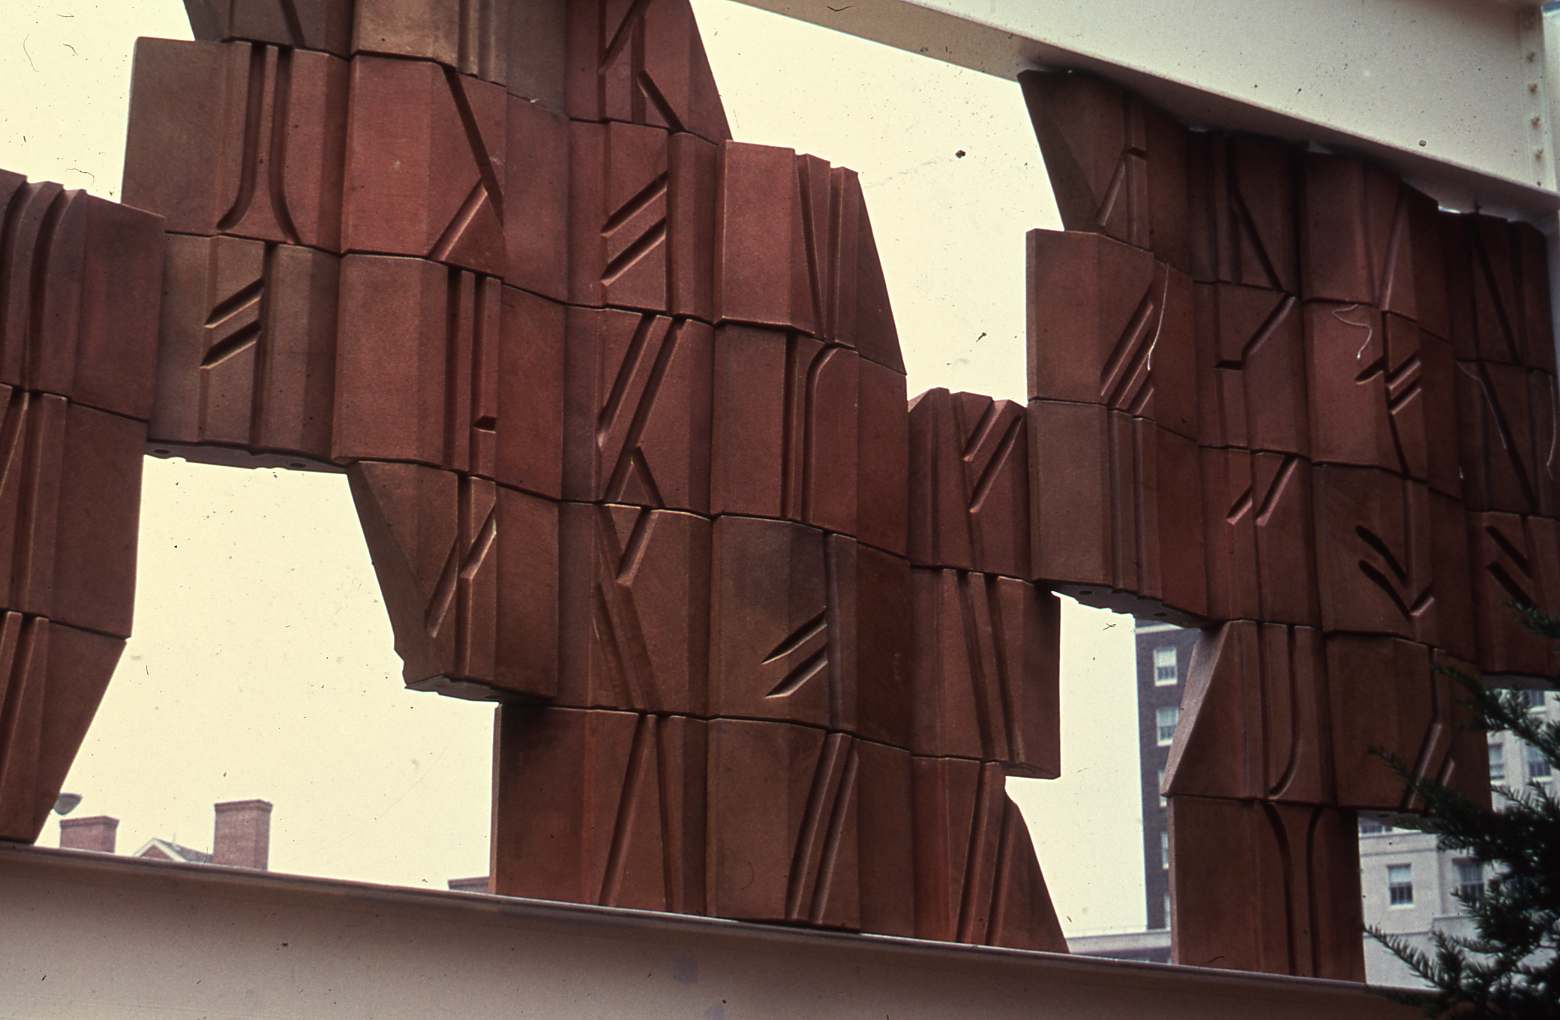 architectural ceramic art by William Daley